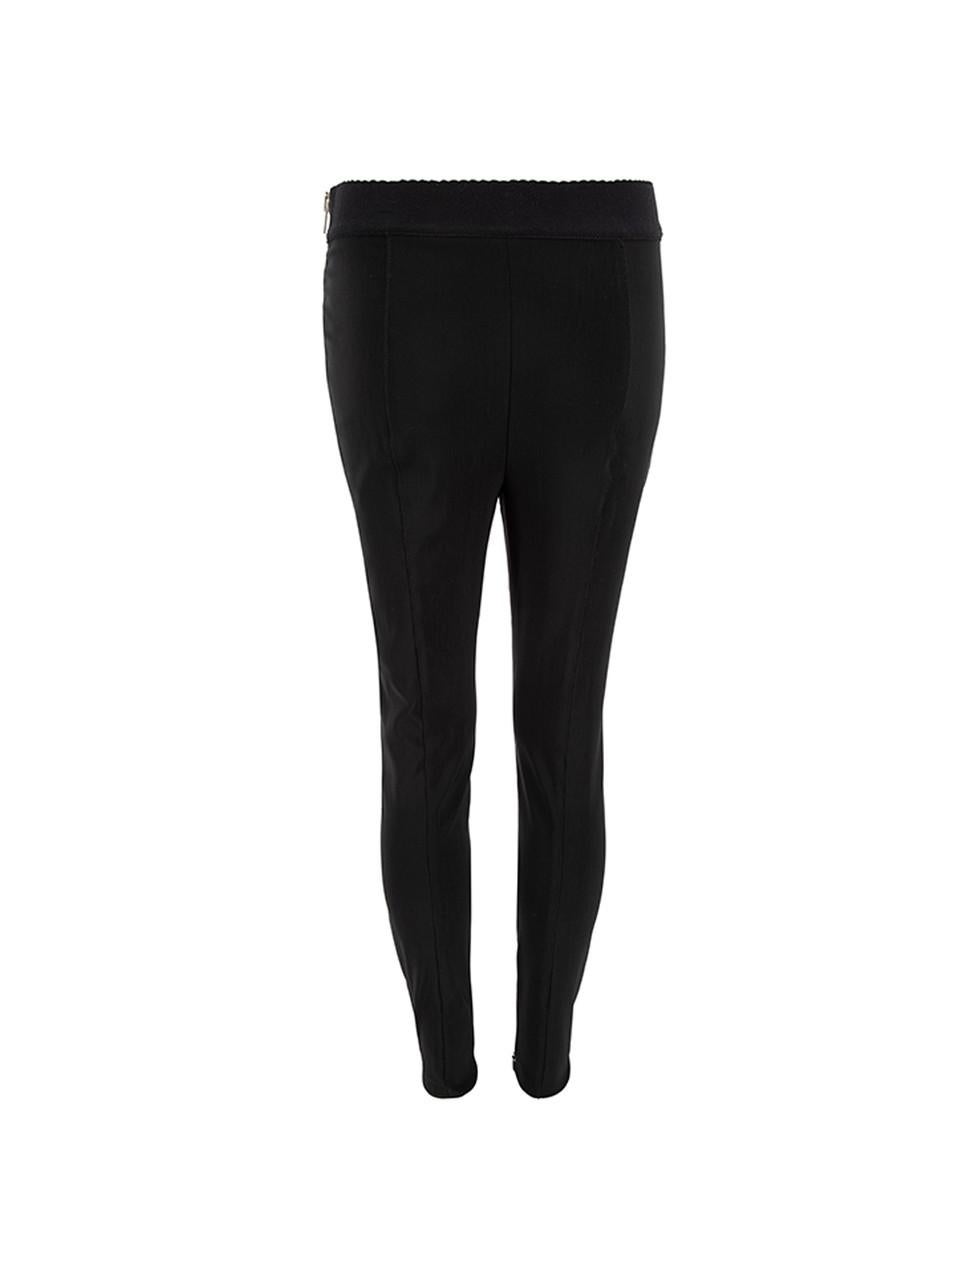 Pre-Loved Alexander Wang Women's Black Oversized Zip Accent Skinny Trousers In Excellent Condition For Sale In London, GB